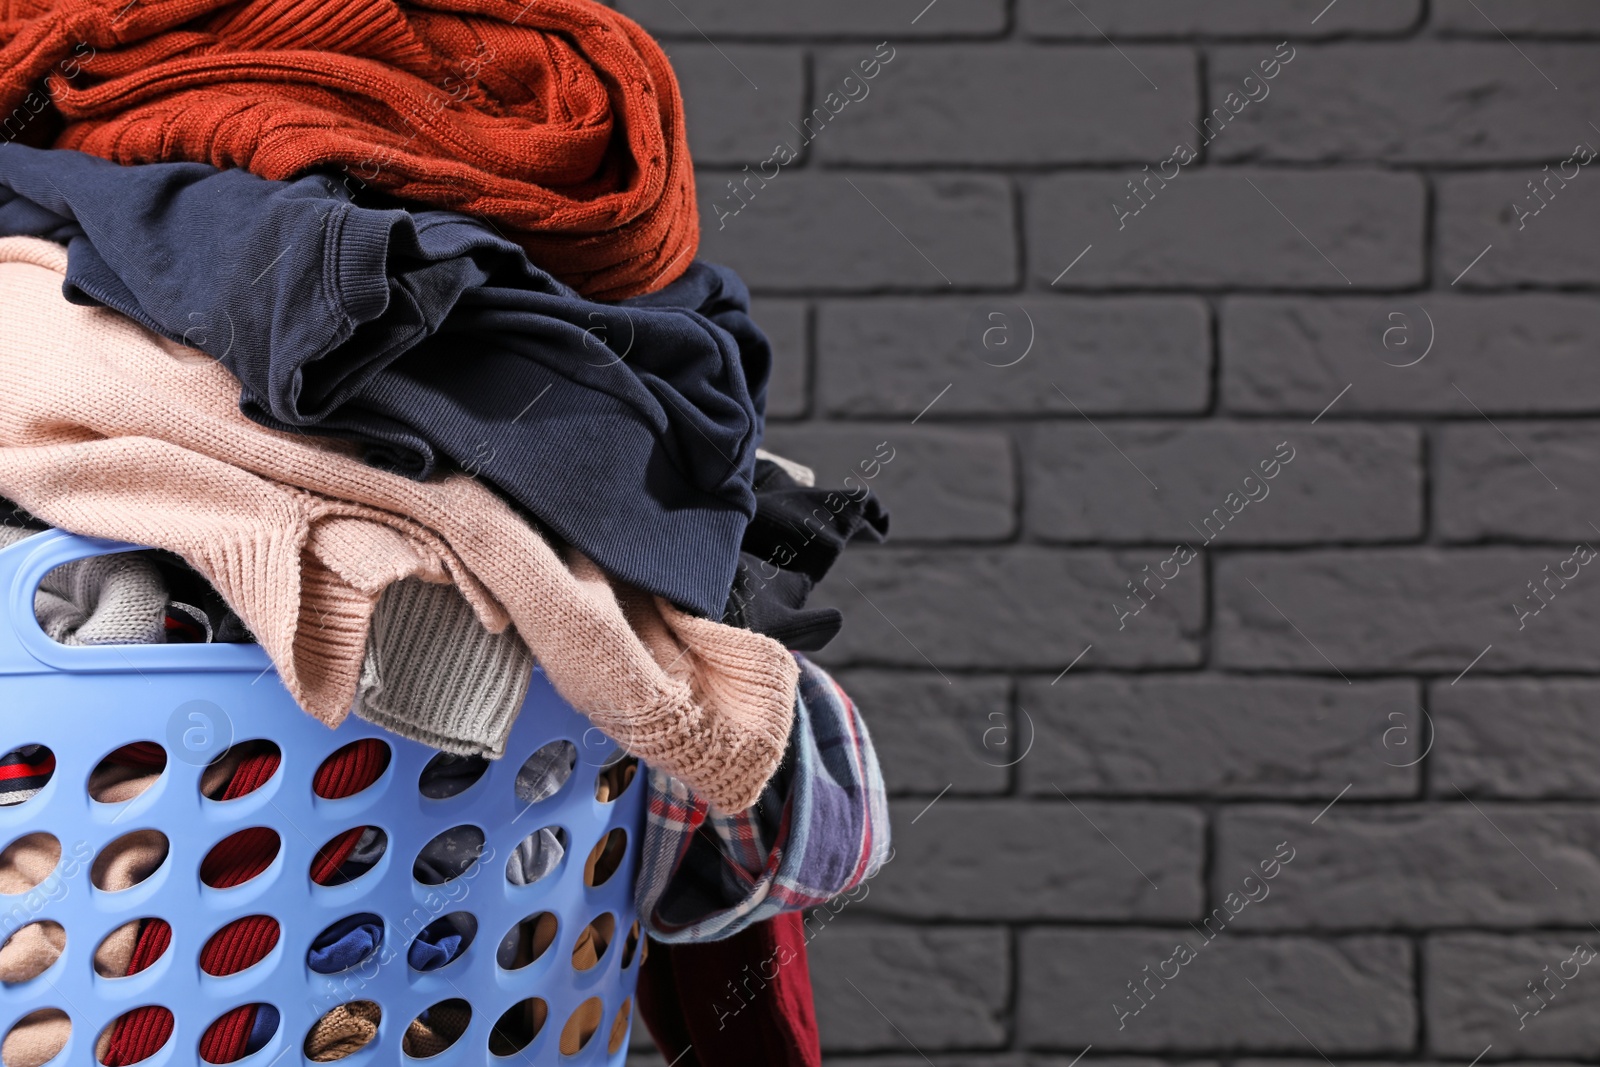 Photo of Laundry basket with clothes near black brick wall. Space for text